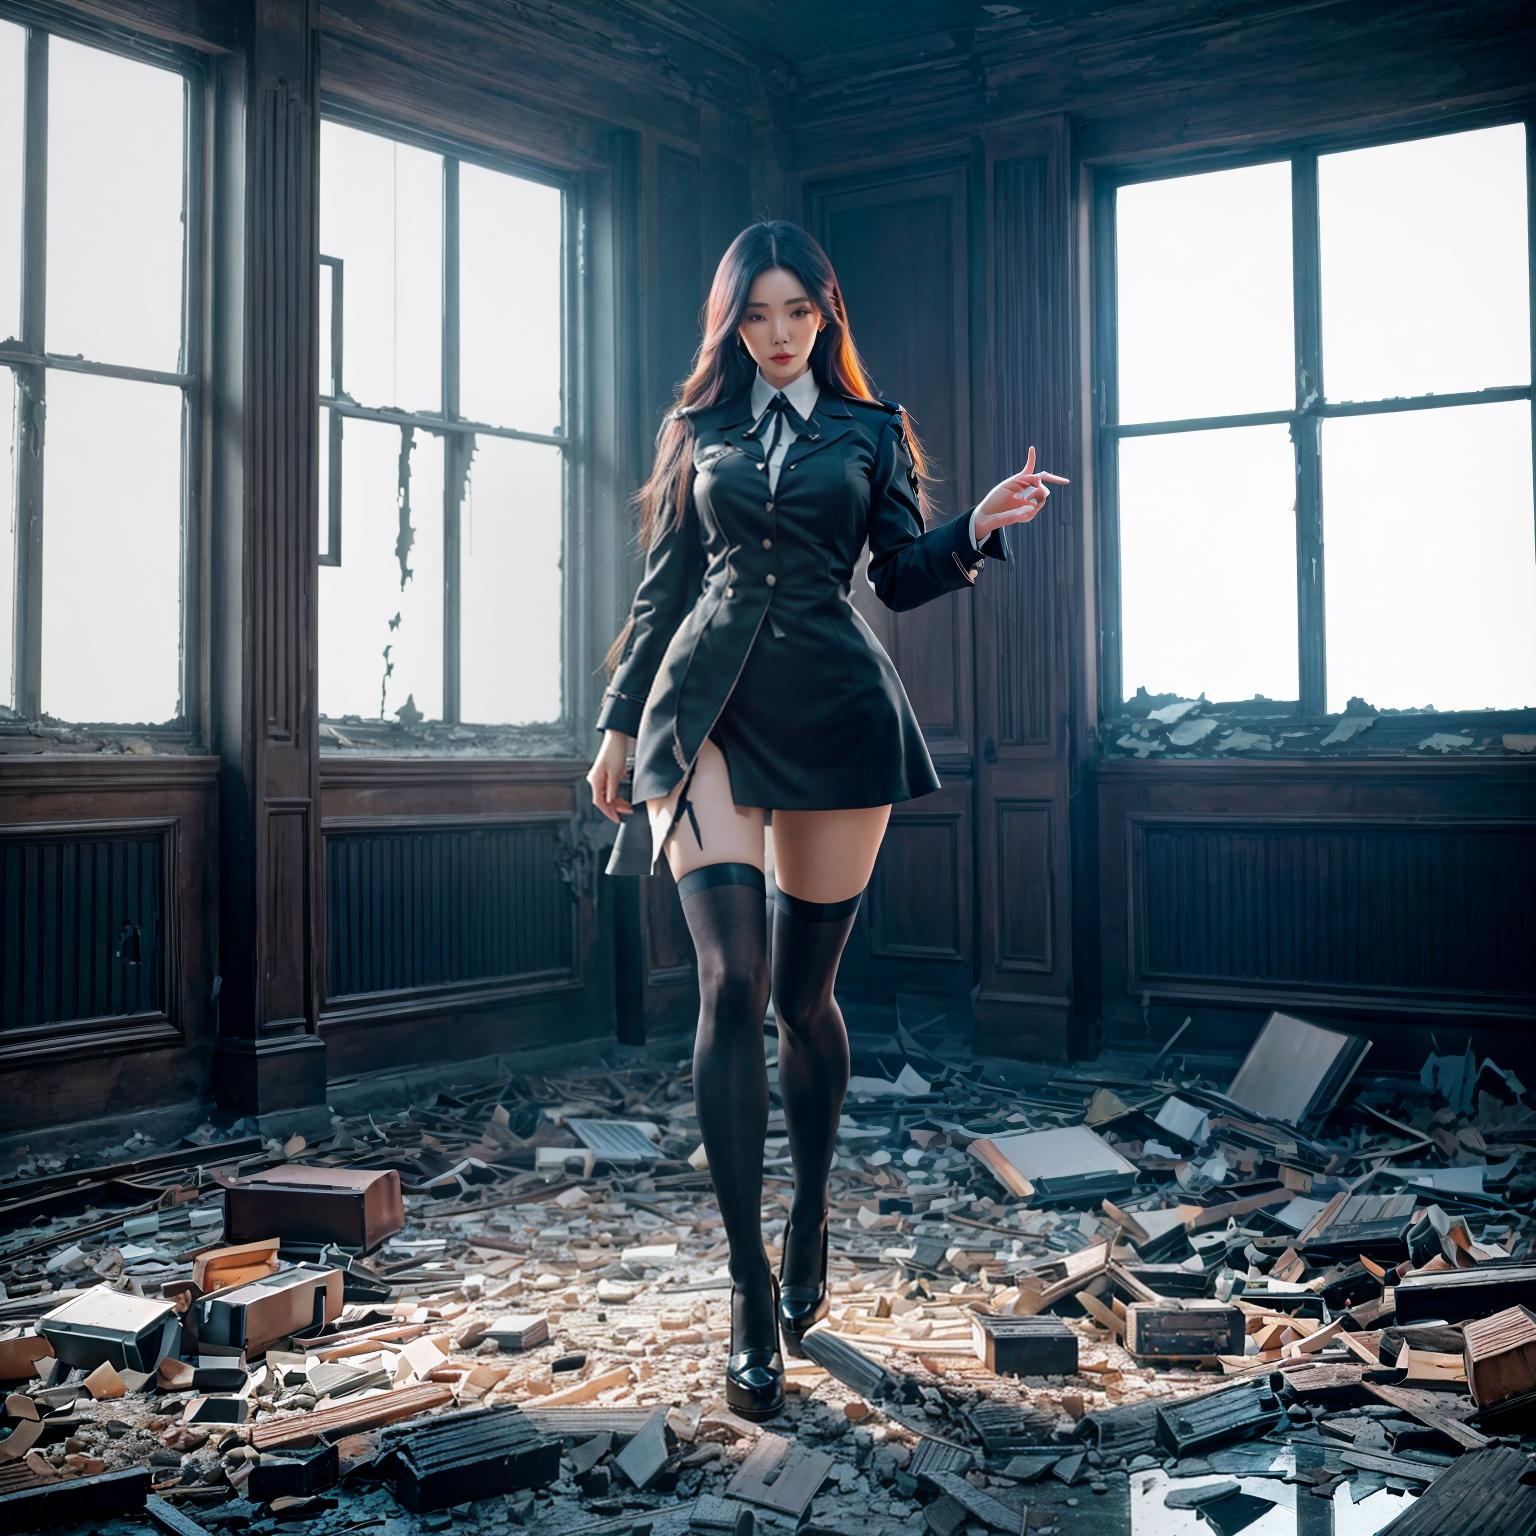  A wearing uniform and black stockings is running through a room with a broken window. beauty asia idol face, beauty face, perfect body, The room appears to be in a state of disrepair, with debris scattered around. The has a determined look on her face as she navigates through the ruined space. There's a scary huge monster running behind . hyperrealistic, full body, detailed clothing, highly detailed, cinematic lighting, stunningly beautiful, intricate, sharp focus, f/1. 8, 85mm, (centered image composition), (professionally color graded), ((bright soft diffused light)), volumetric fog, trending on instagram, trending on tumblr, HDR 4K, 8K